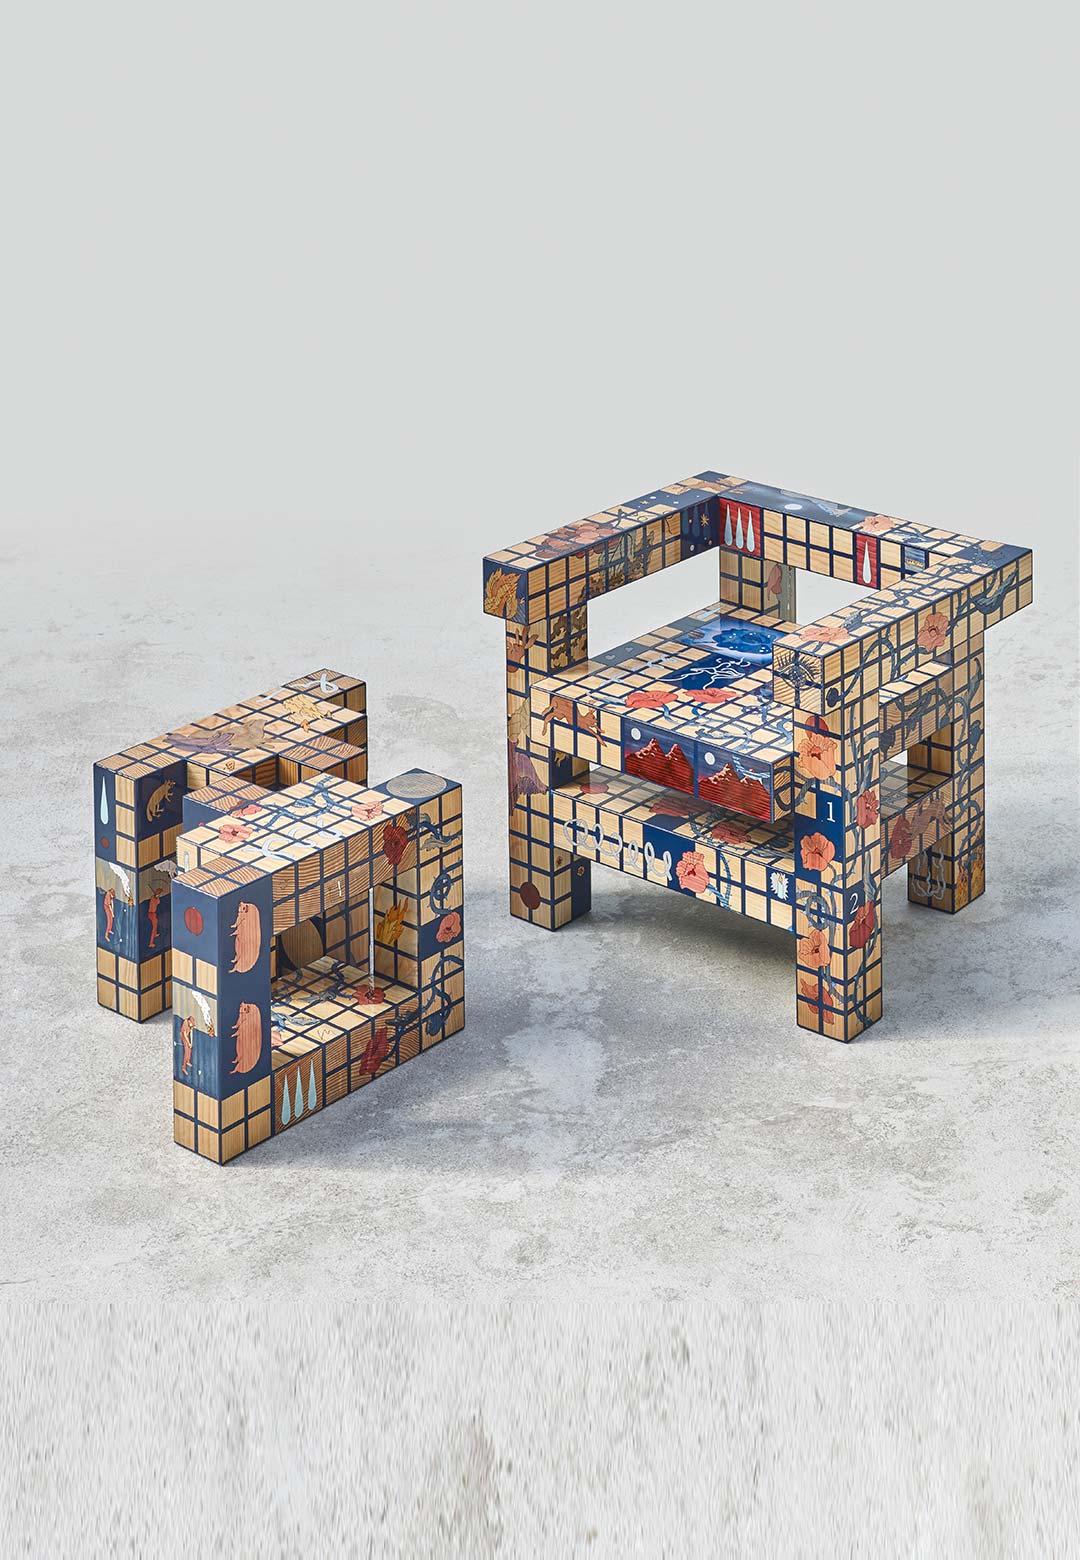 Laurids Gallée's 'Fever Dreams' furniture takes cues from marquetry and applied arts